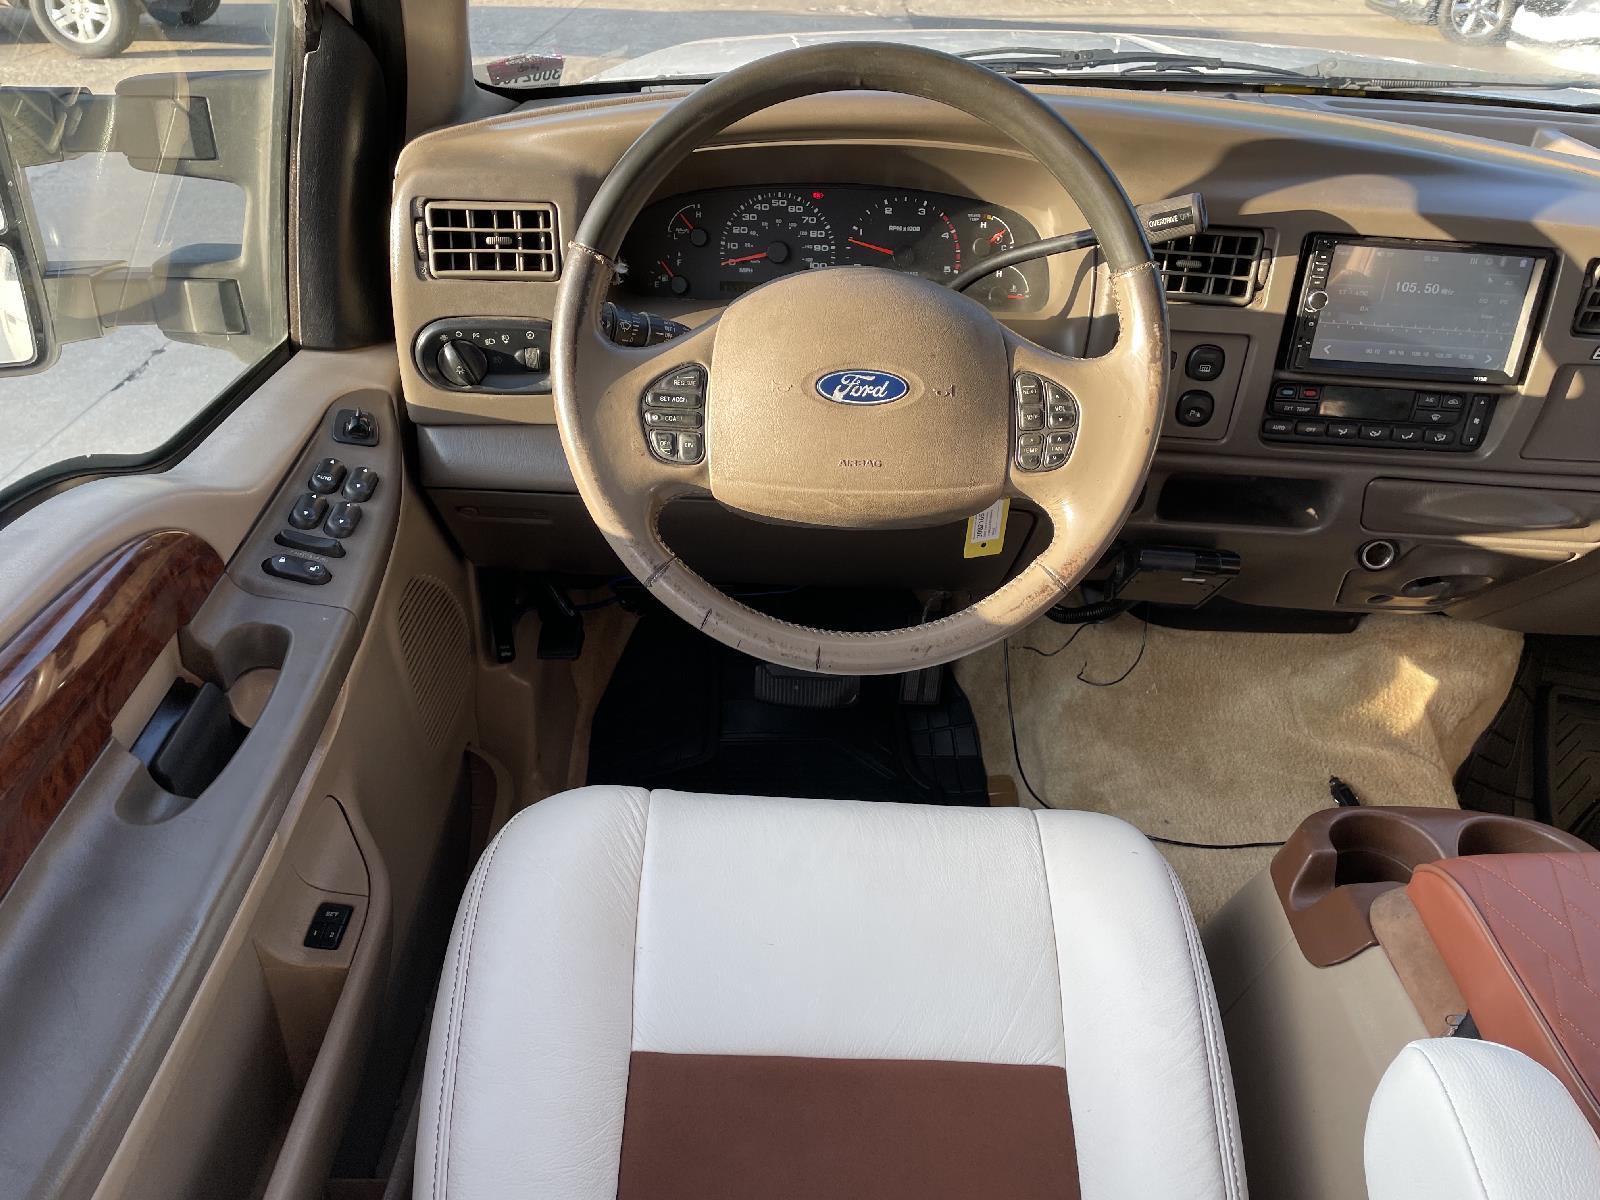 Used 2002 Ford Excursion Limited 4 door for sale in St Joseph MO